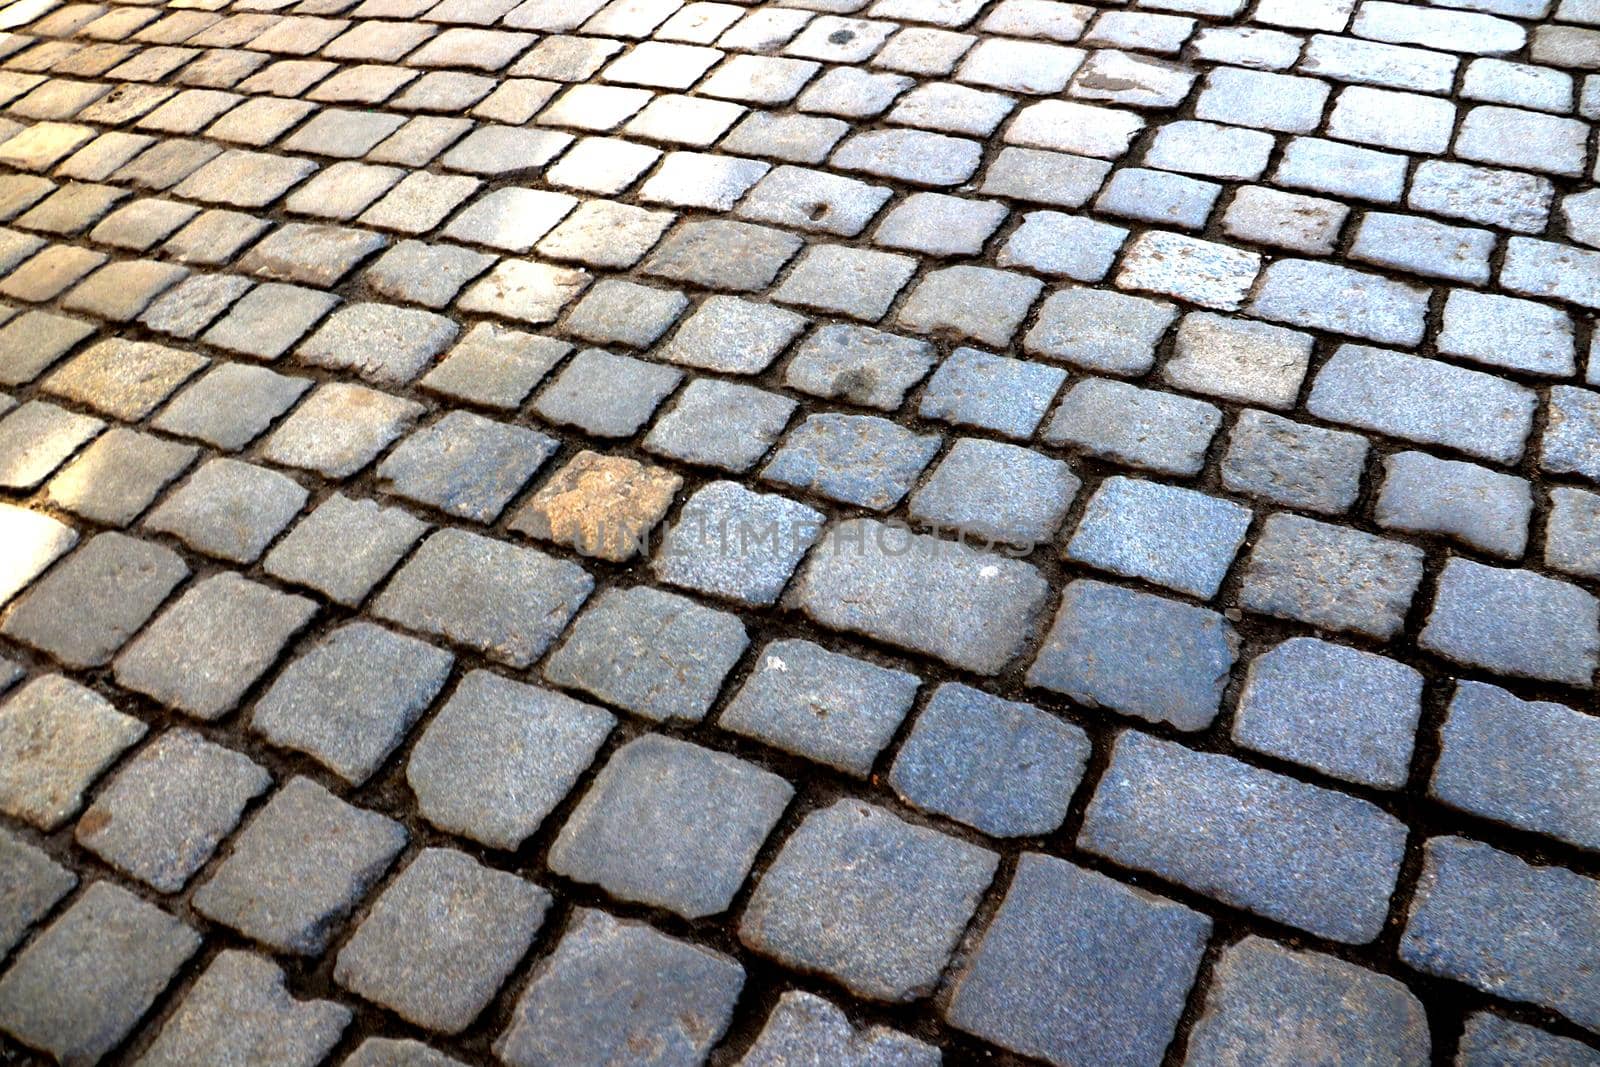 Old paving stones in the old part of the city. Background, out of focus, blurred